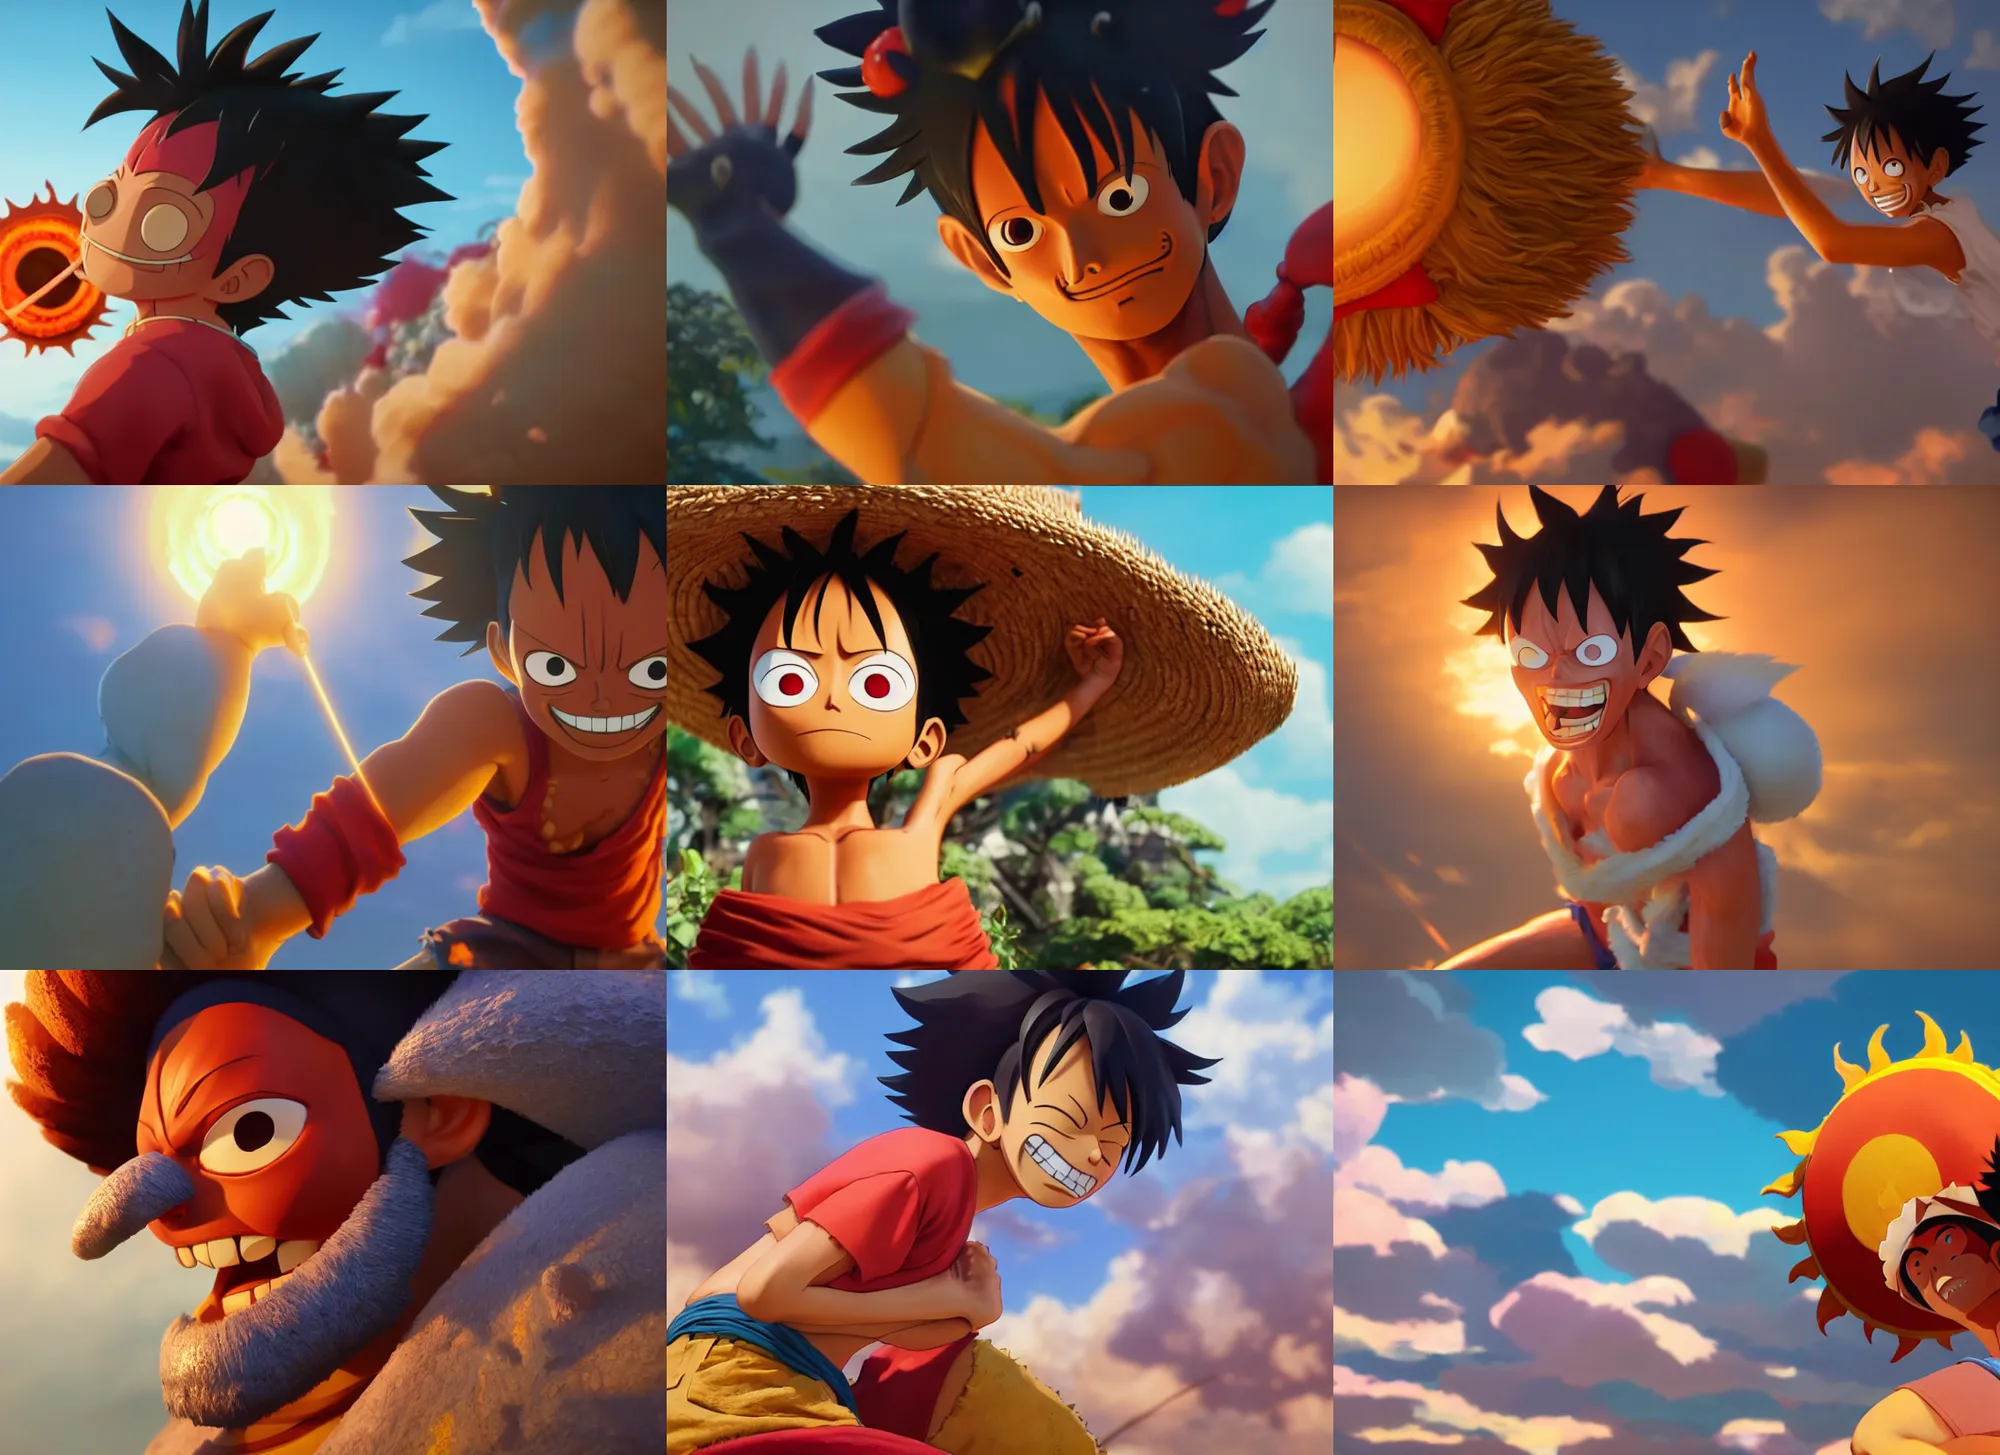 Fluffycactus on X: 1044 Spoilers: Sun God Luffy is here and the